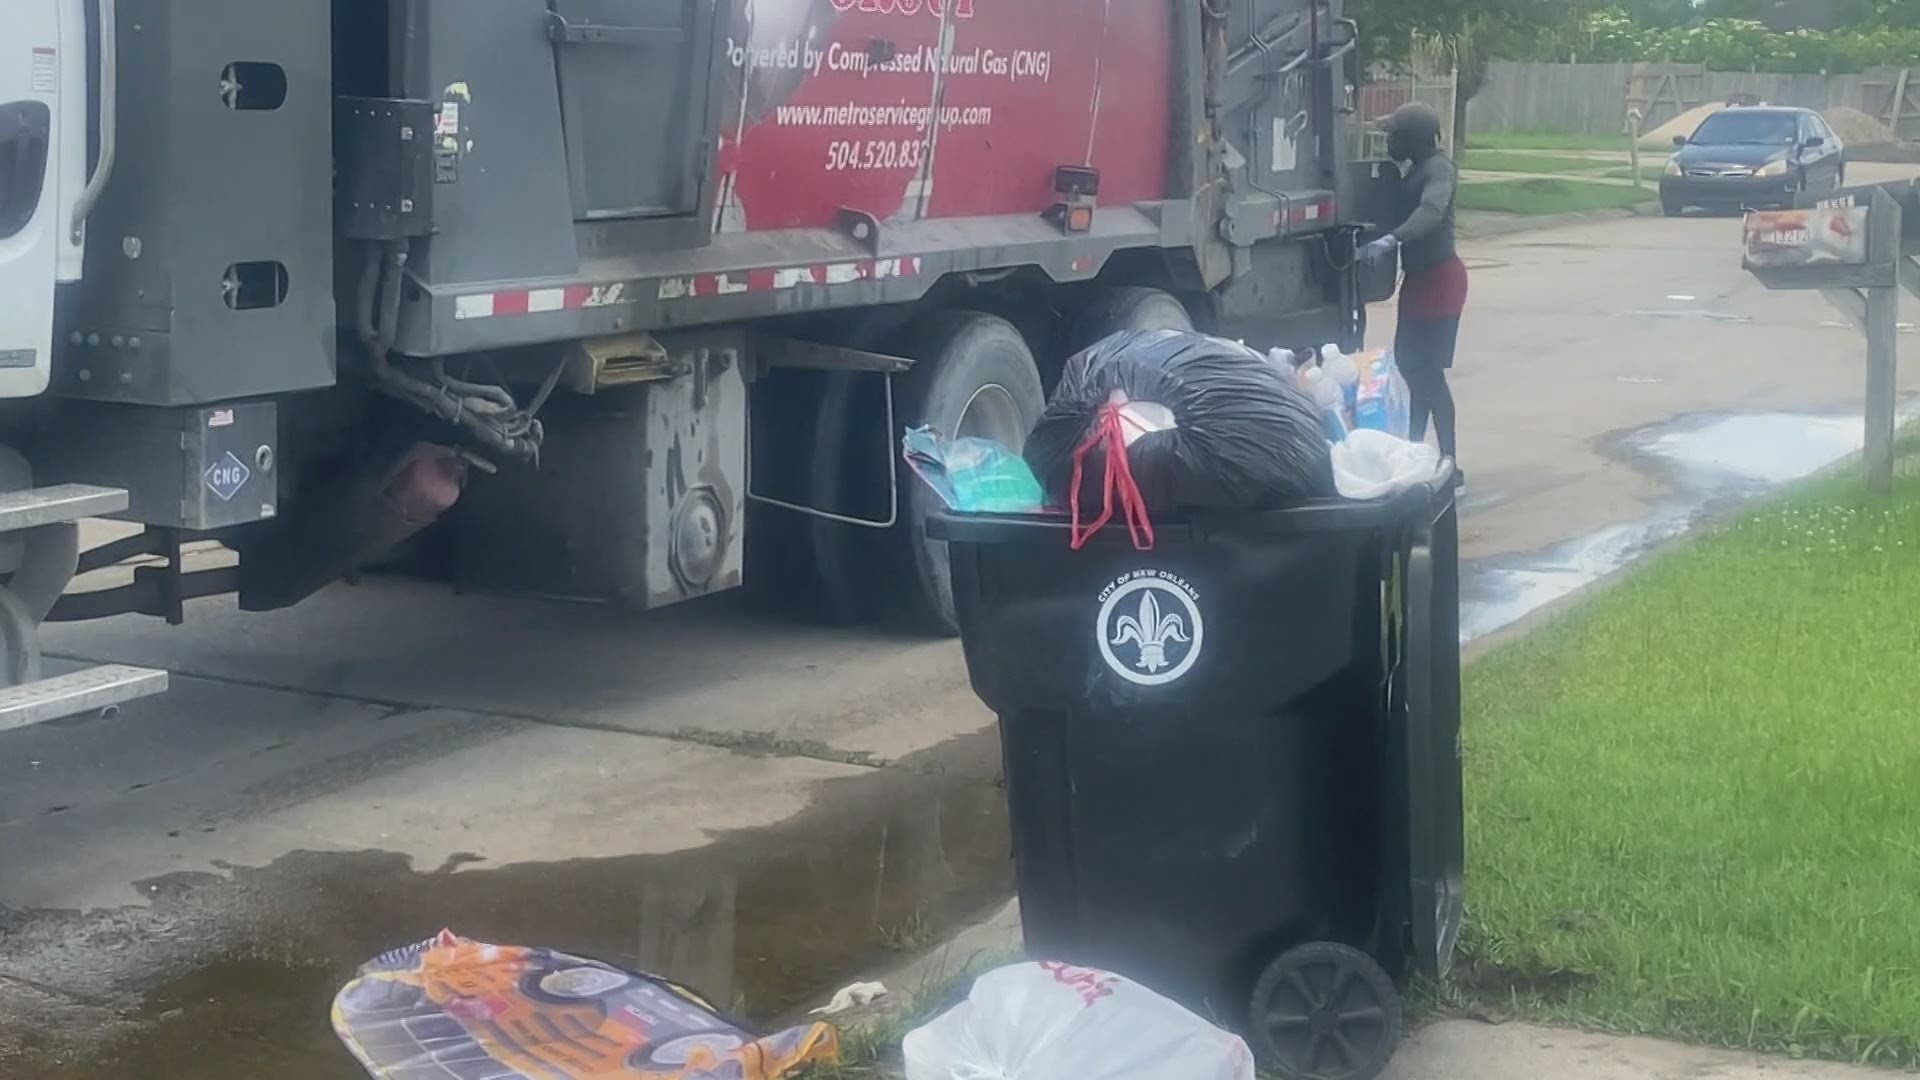 With the post-pandemic labor shortage, the garbage company is suffering with not being able to pick up trash on as scheduled.